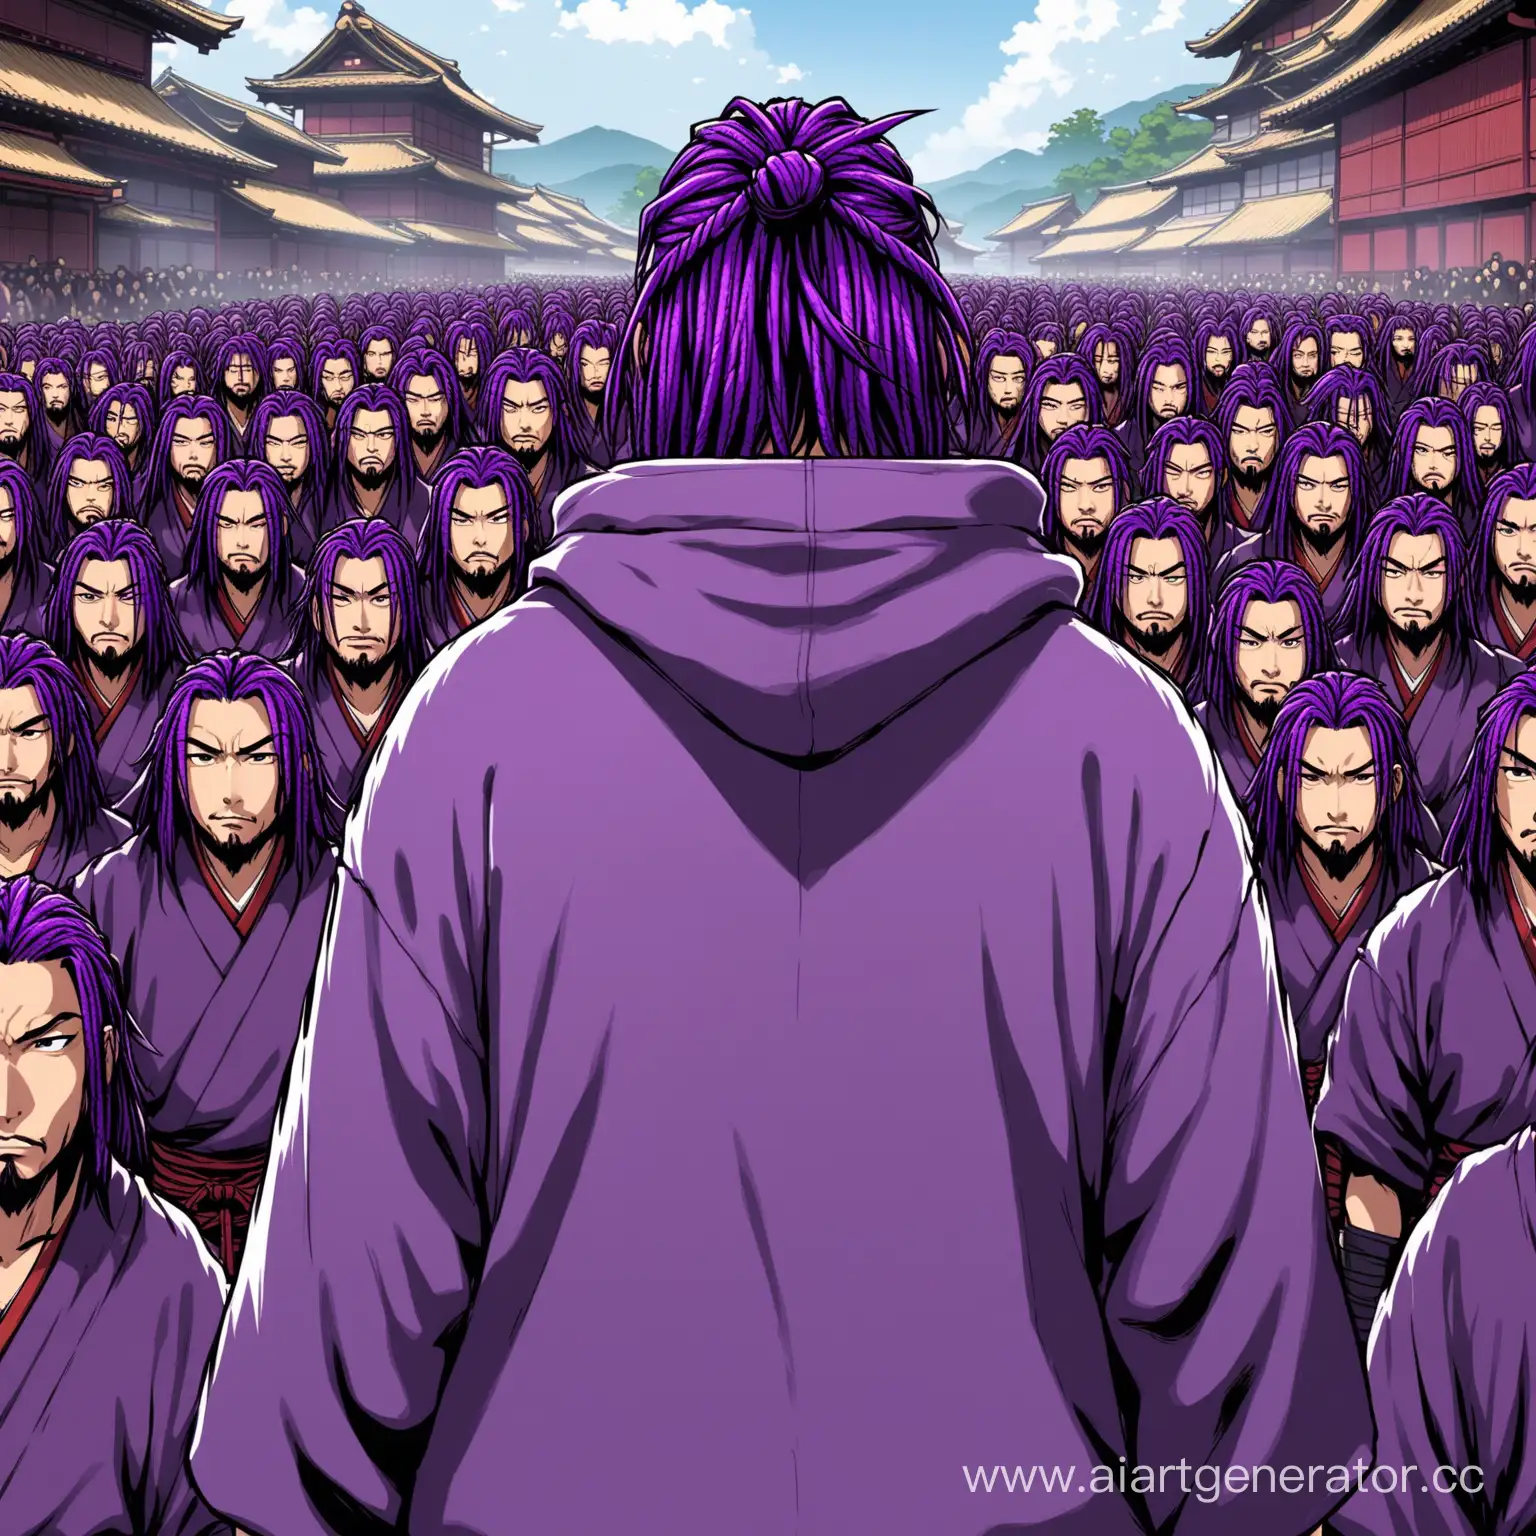 PurpleHaired-Leader-Guides-Samurai-Crowd-in-Vibrant-Hoodie